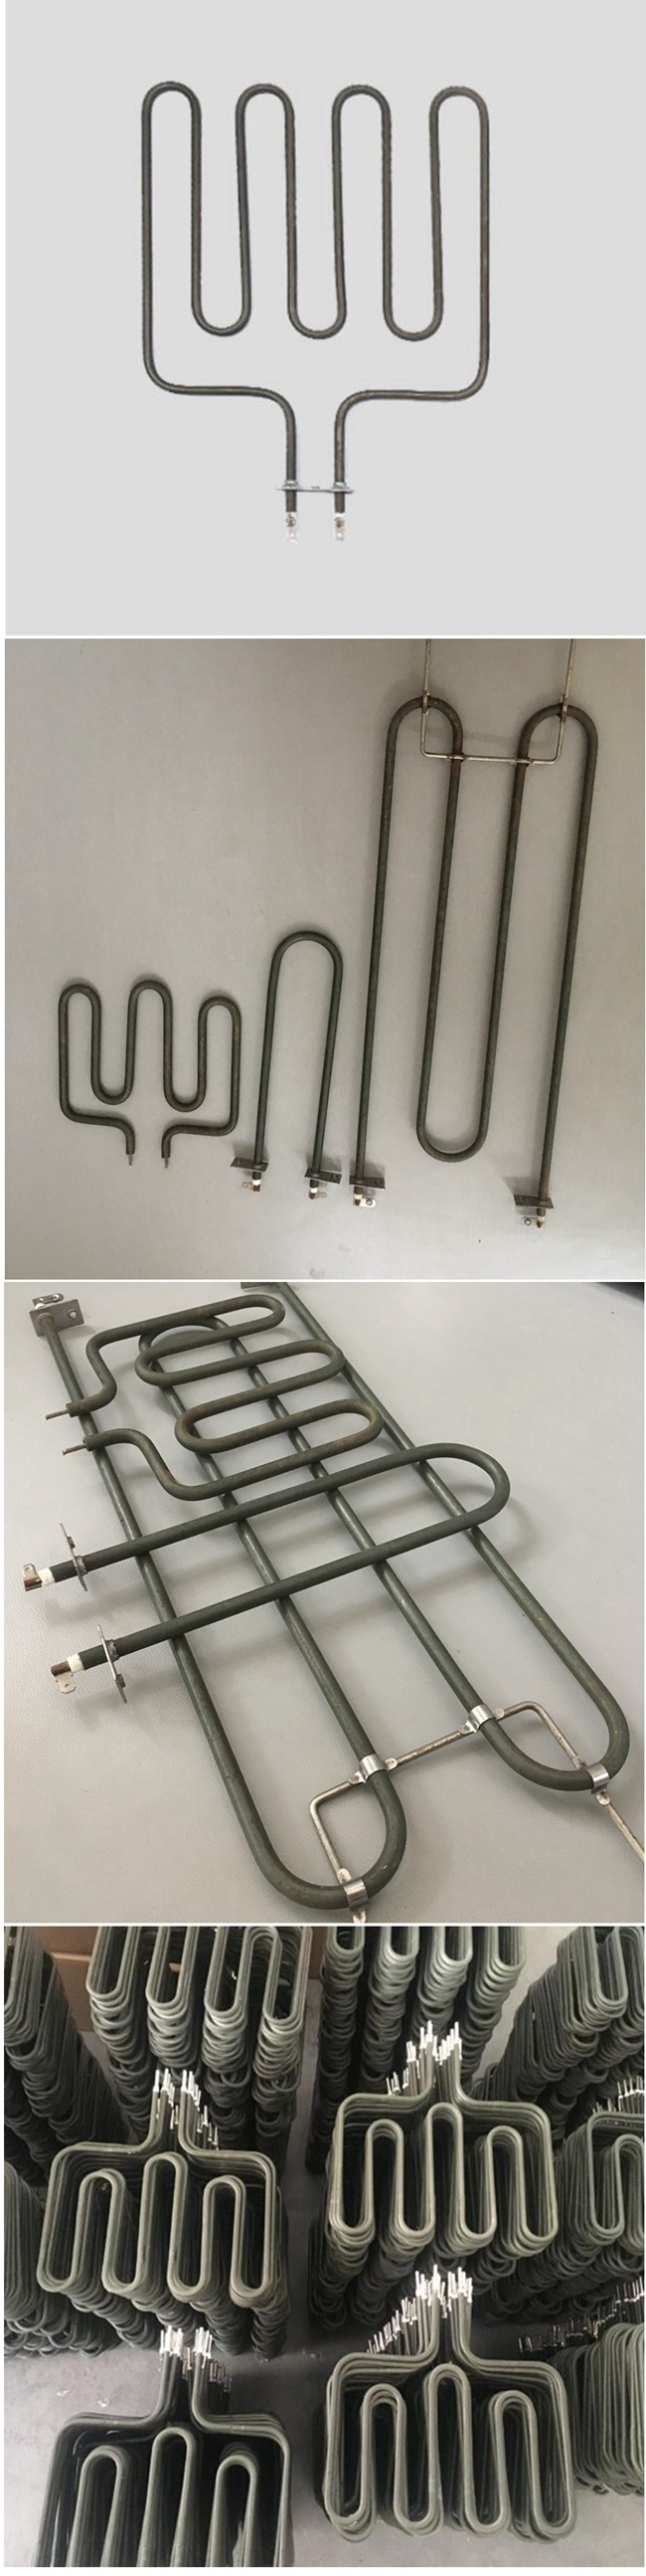 Explosion-Proof Dry Burning Oven Heating Element for Toaster with Safe Use